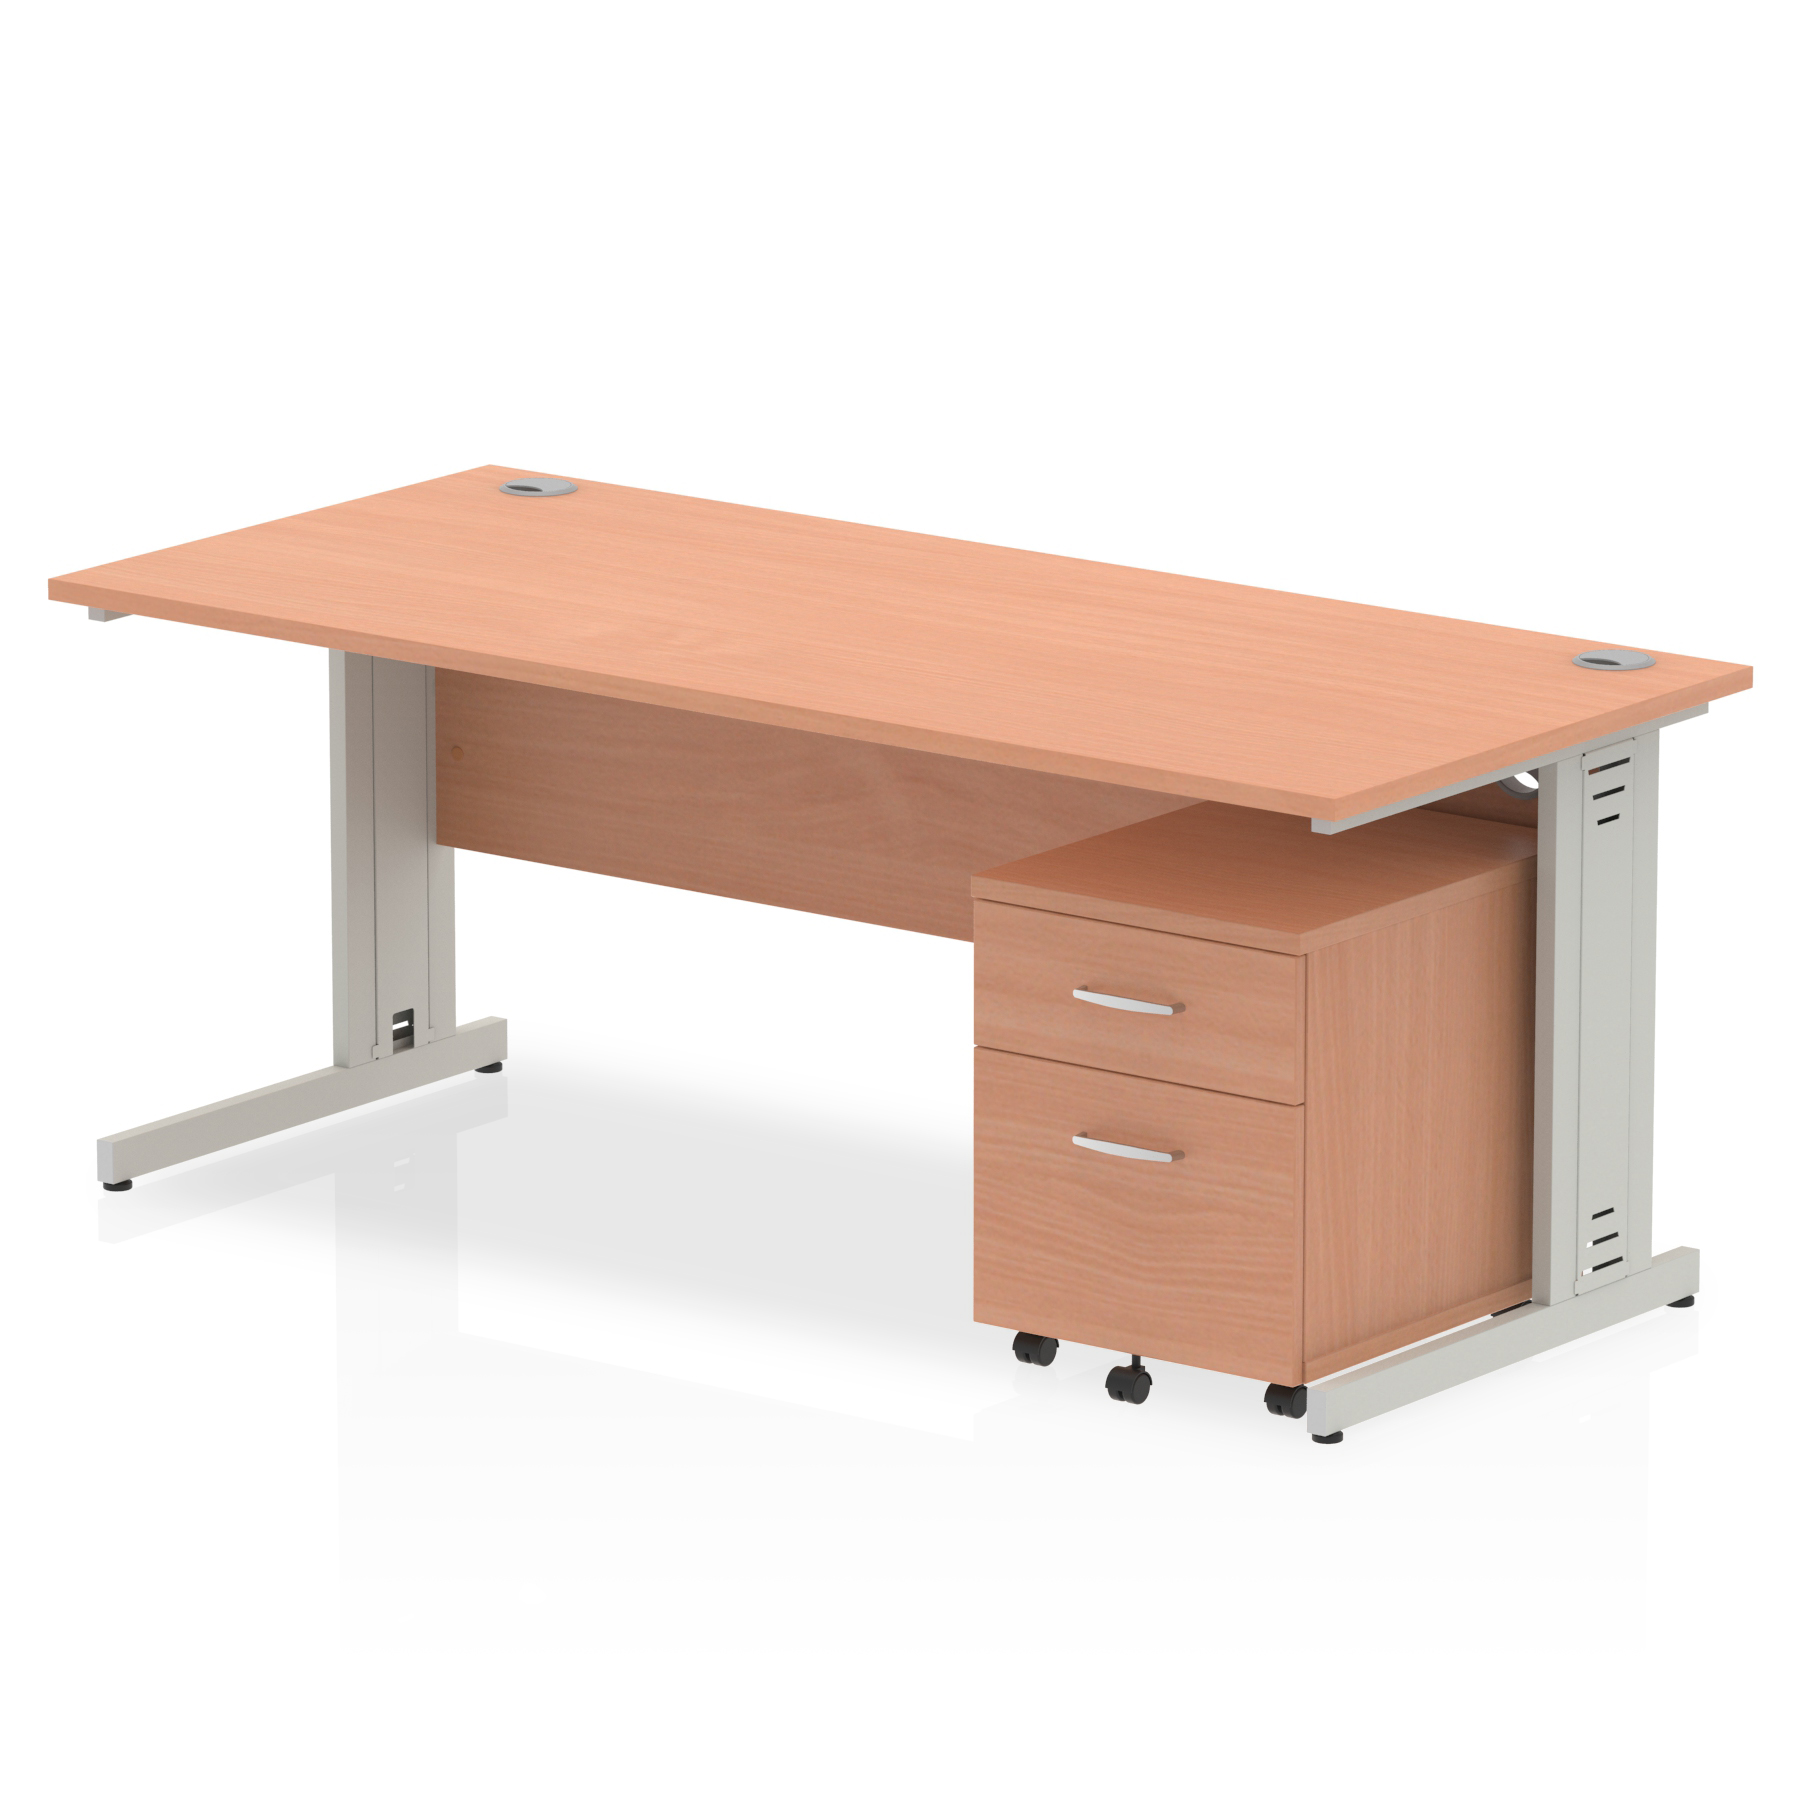 Impulse 1800 x 800mm Straight Desk Beech Top Silver Cable Managed Leg with 2 Drawer Mobile Pedestal